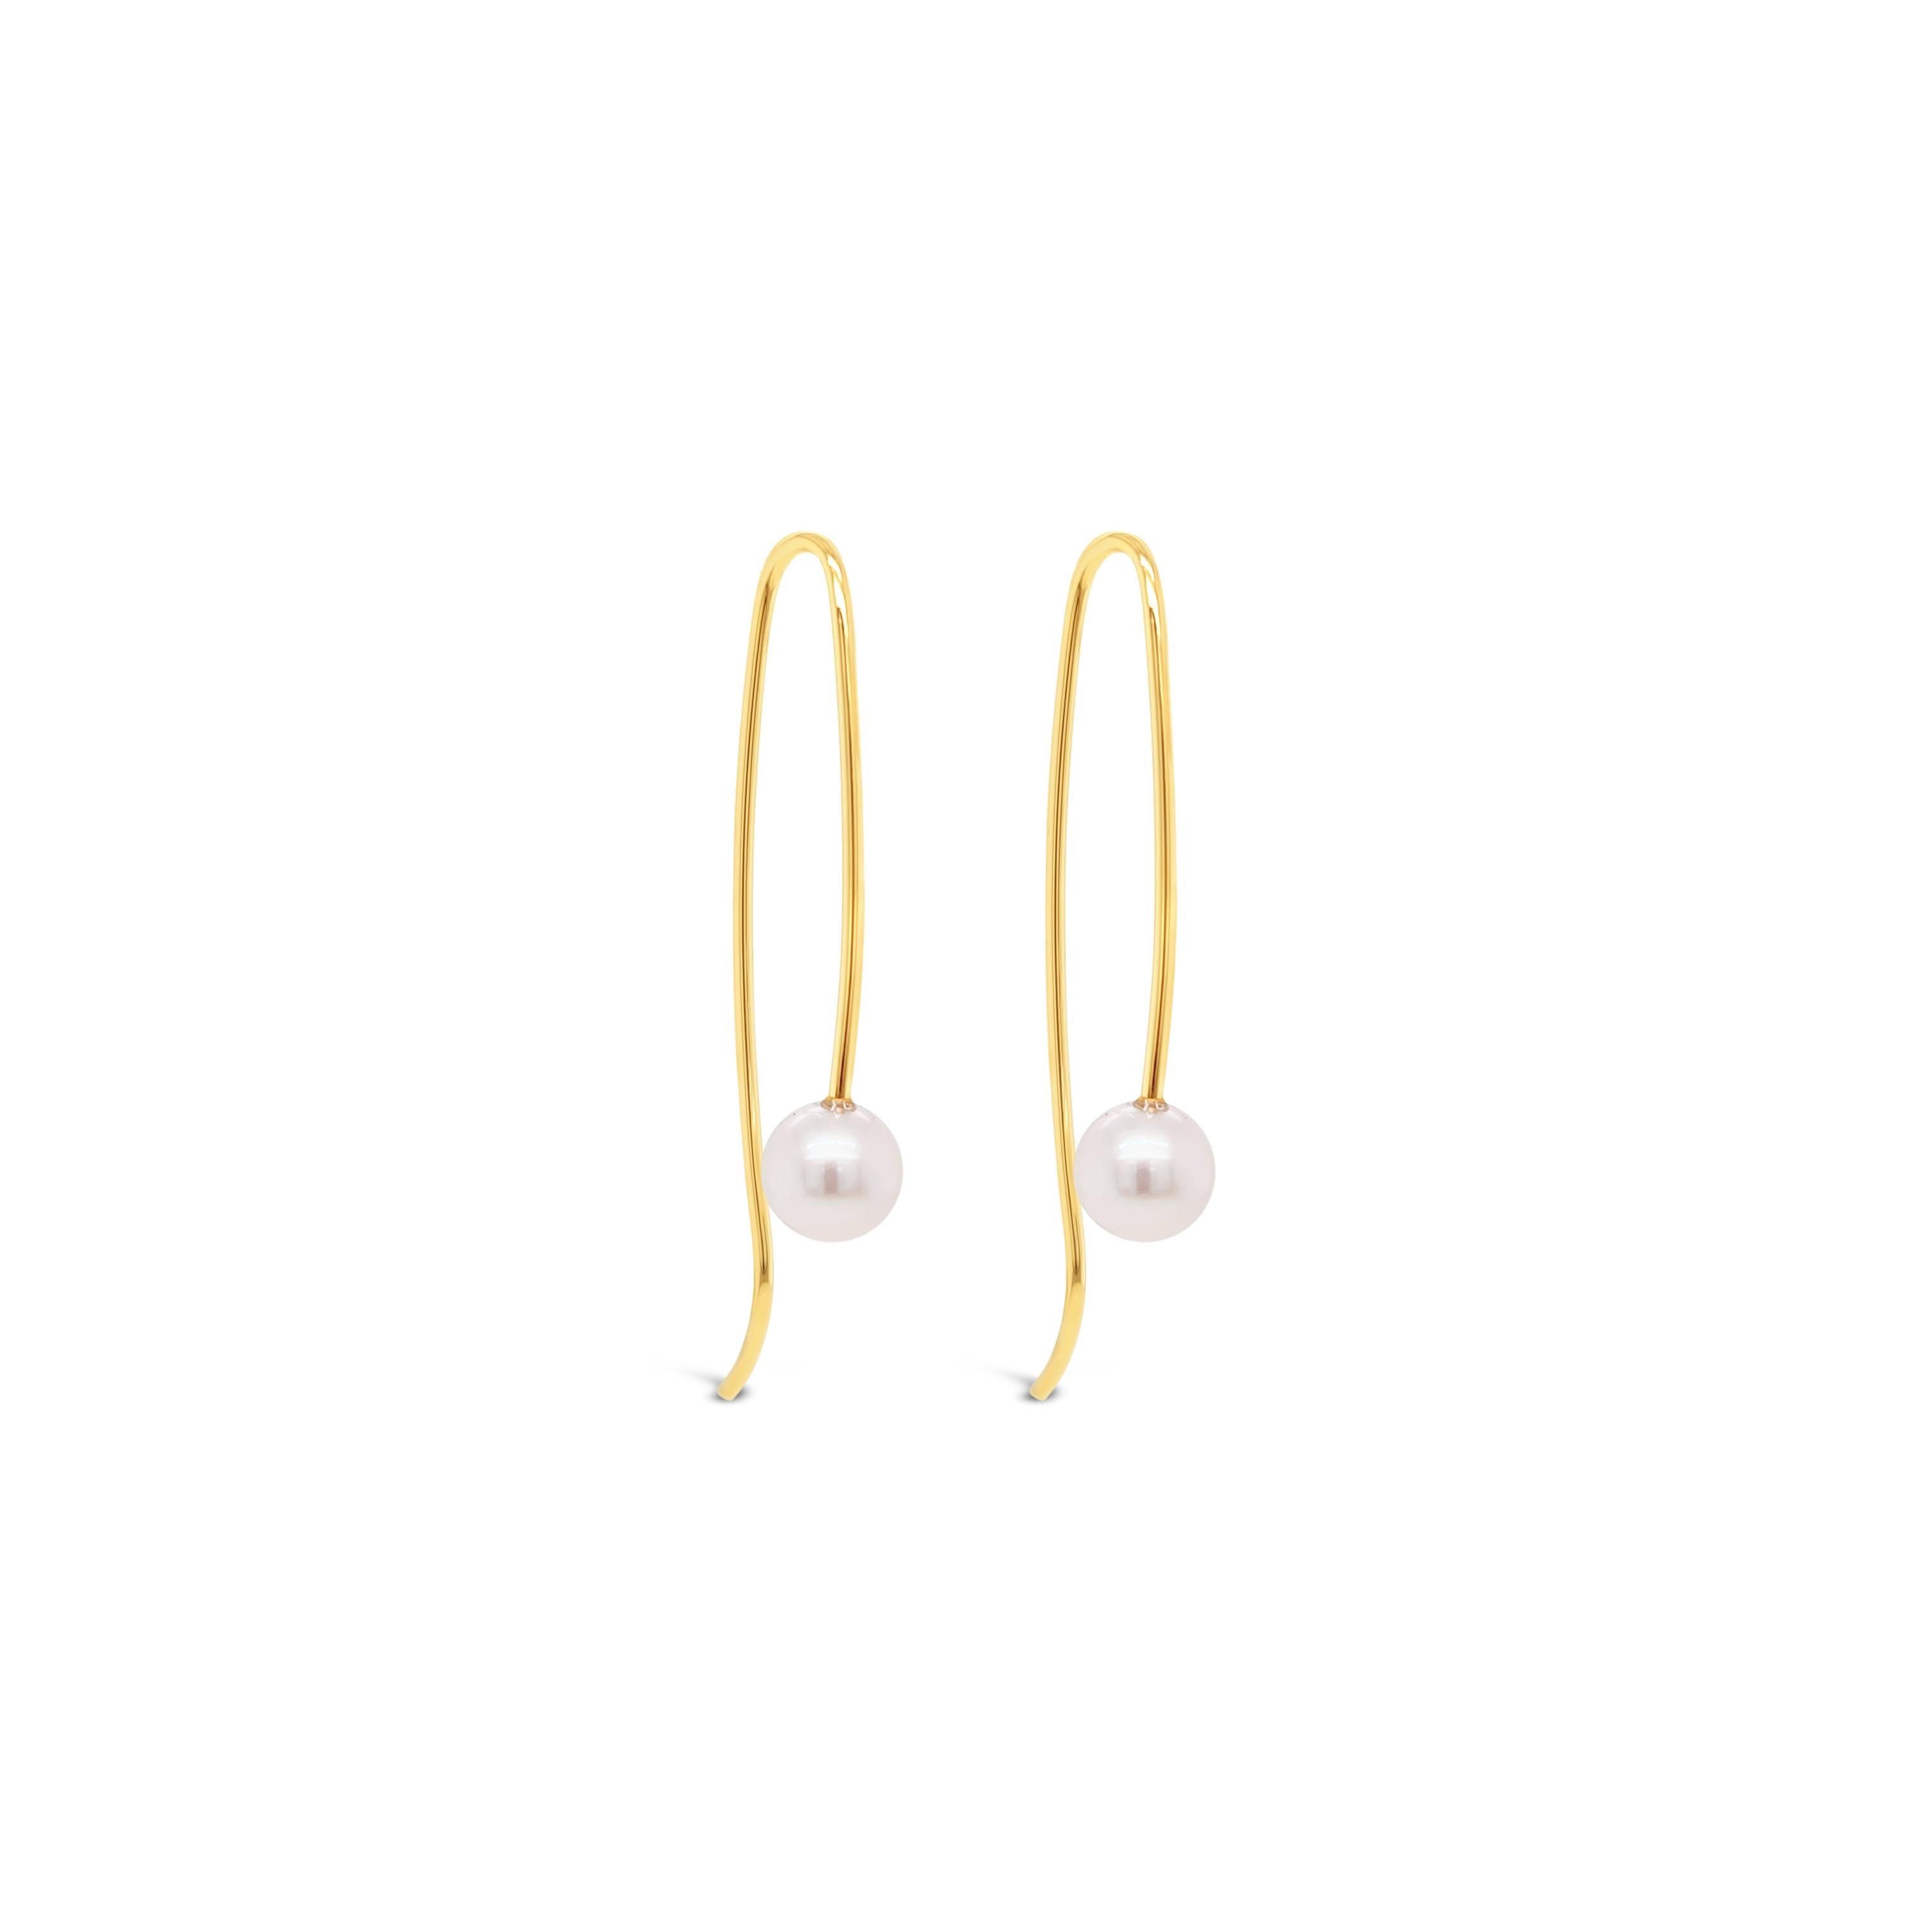 These elegant 18ct yellow gold drop 